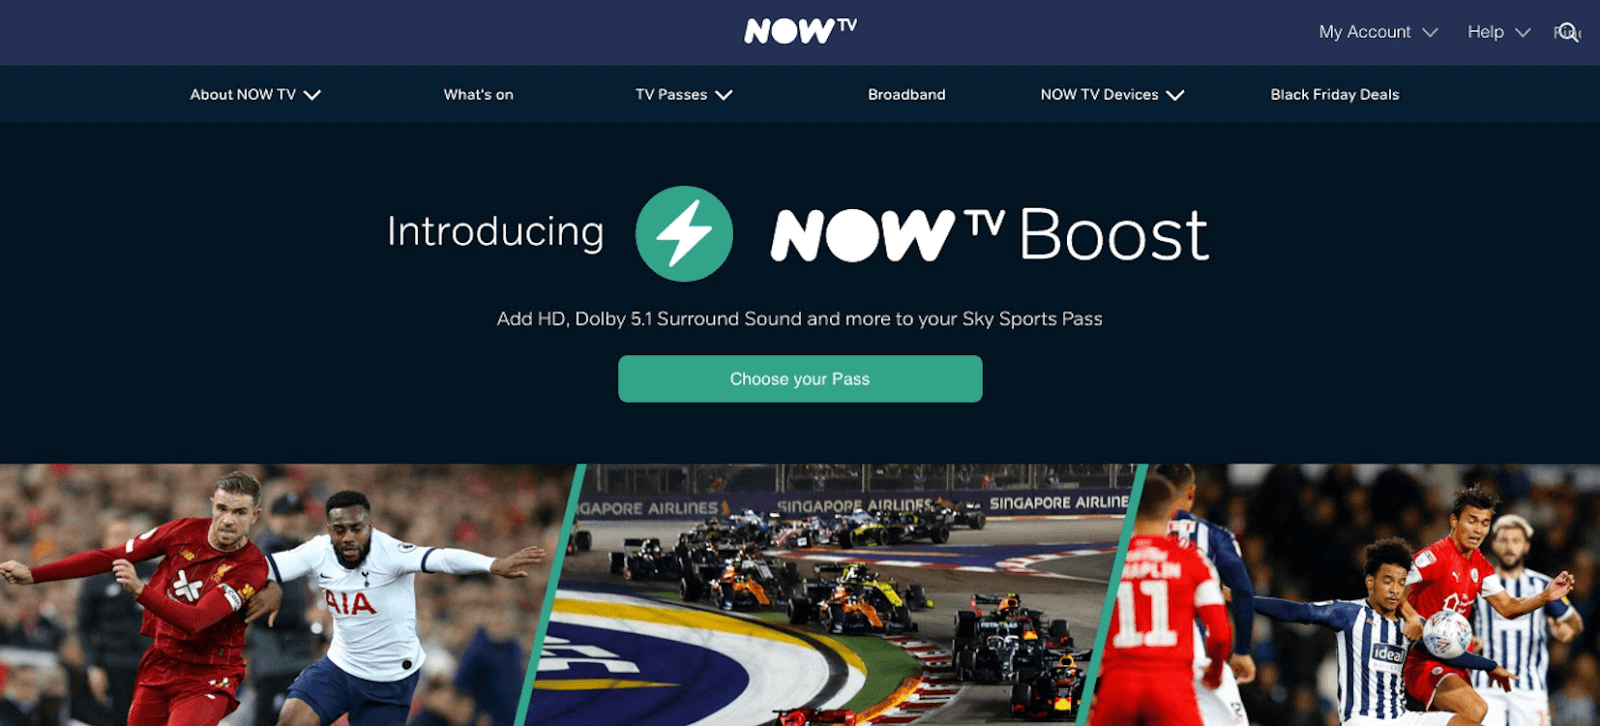 Now TV - Sports Pass + Boost